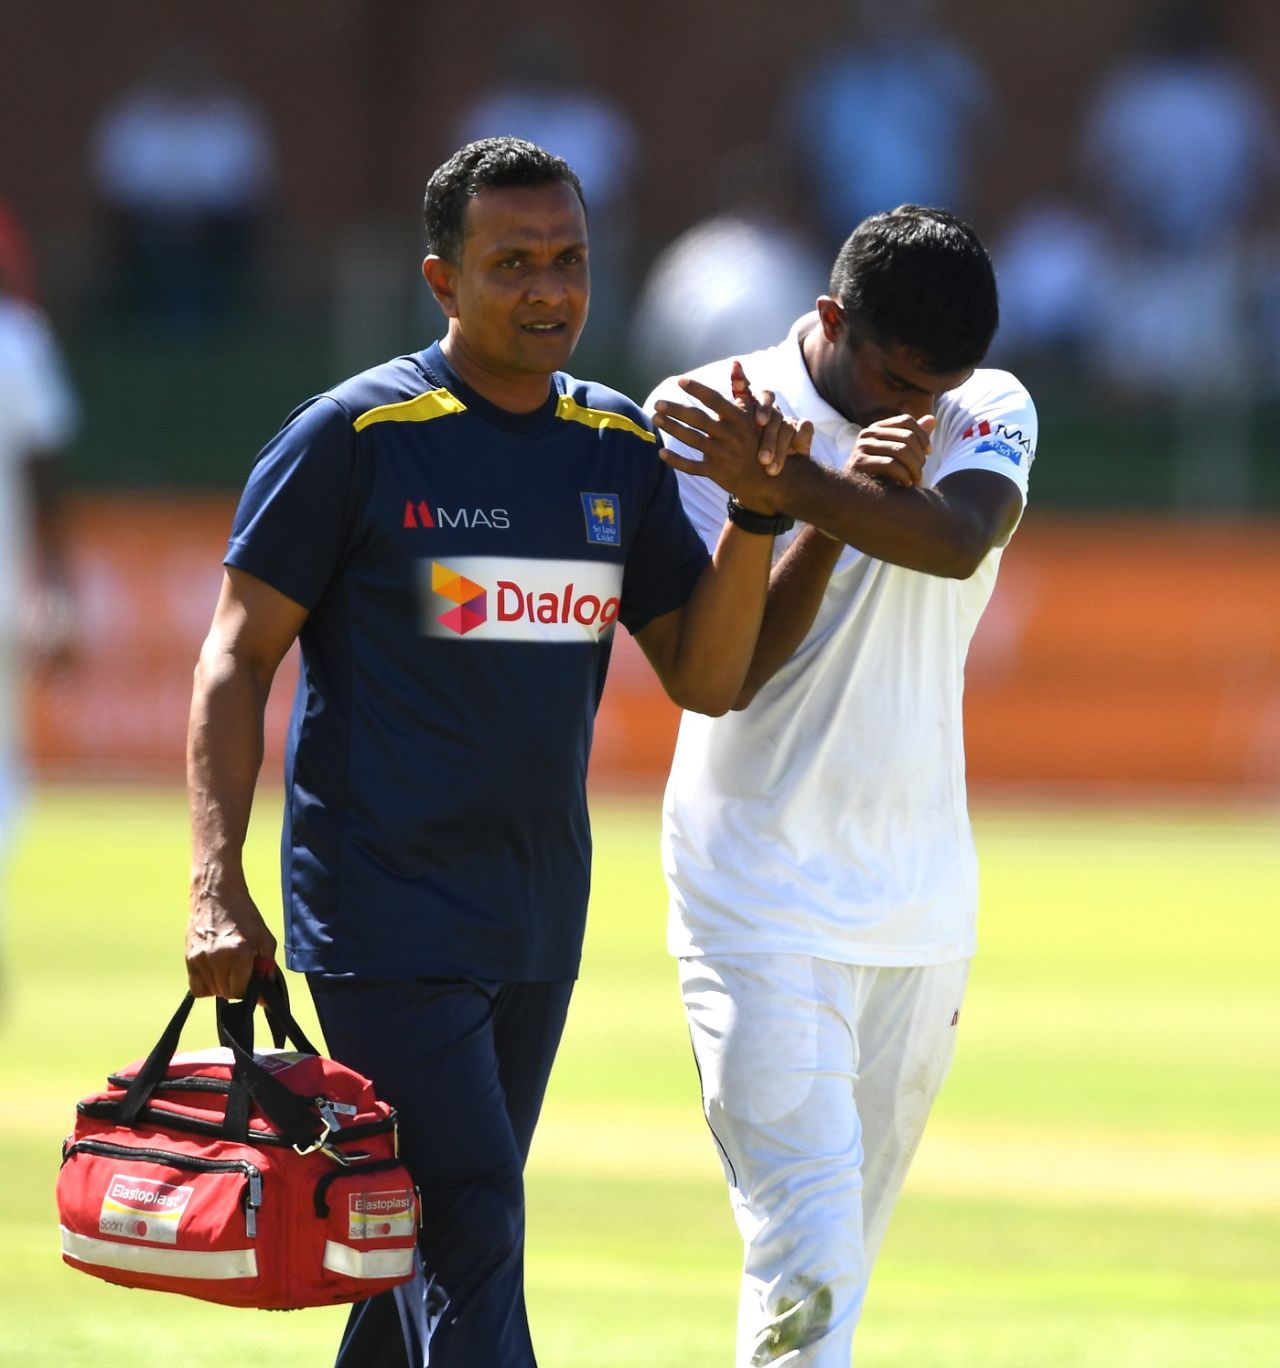 Lasith Embuldeniya is helped off the field after injuring his left thumb, South Africa v Sri Lanka, 2nd Test, Port Elizabeth, 1st day, February 21, 2019